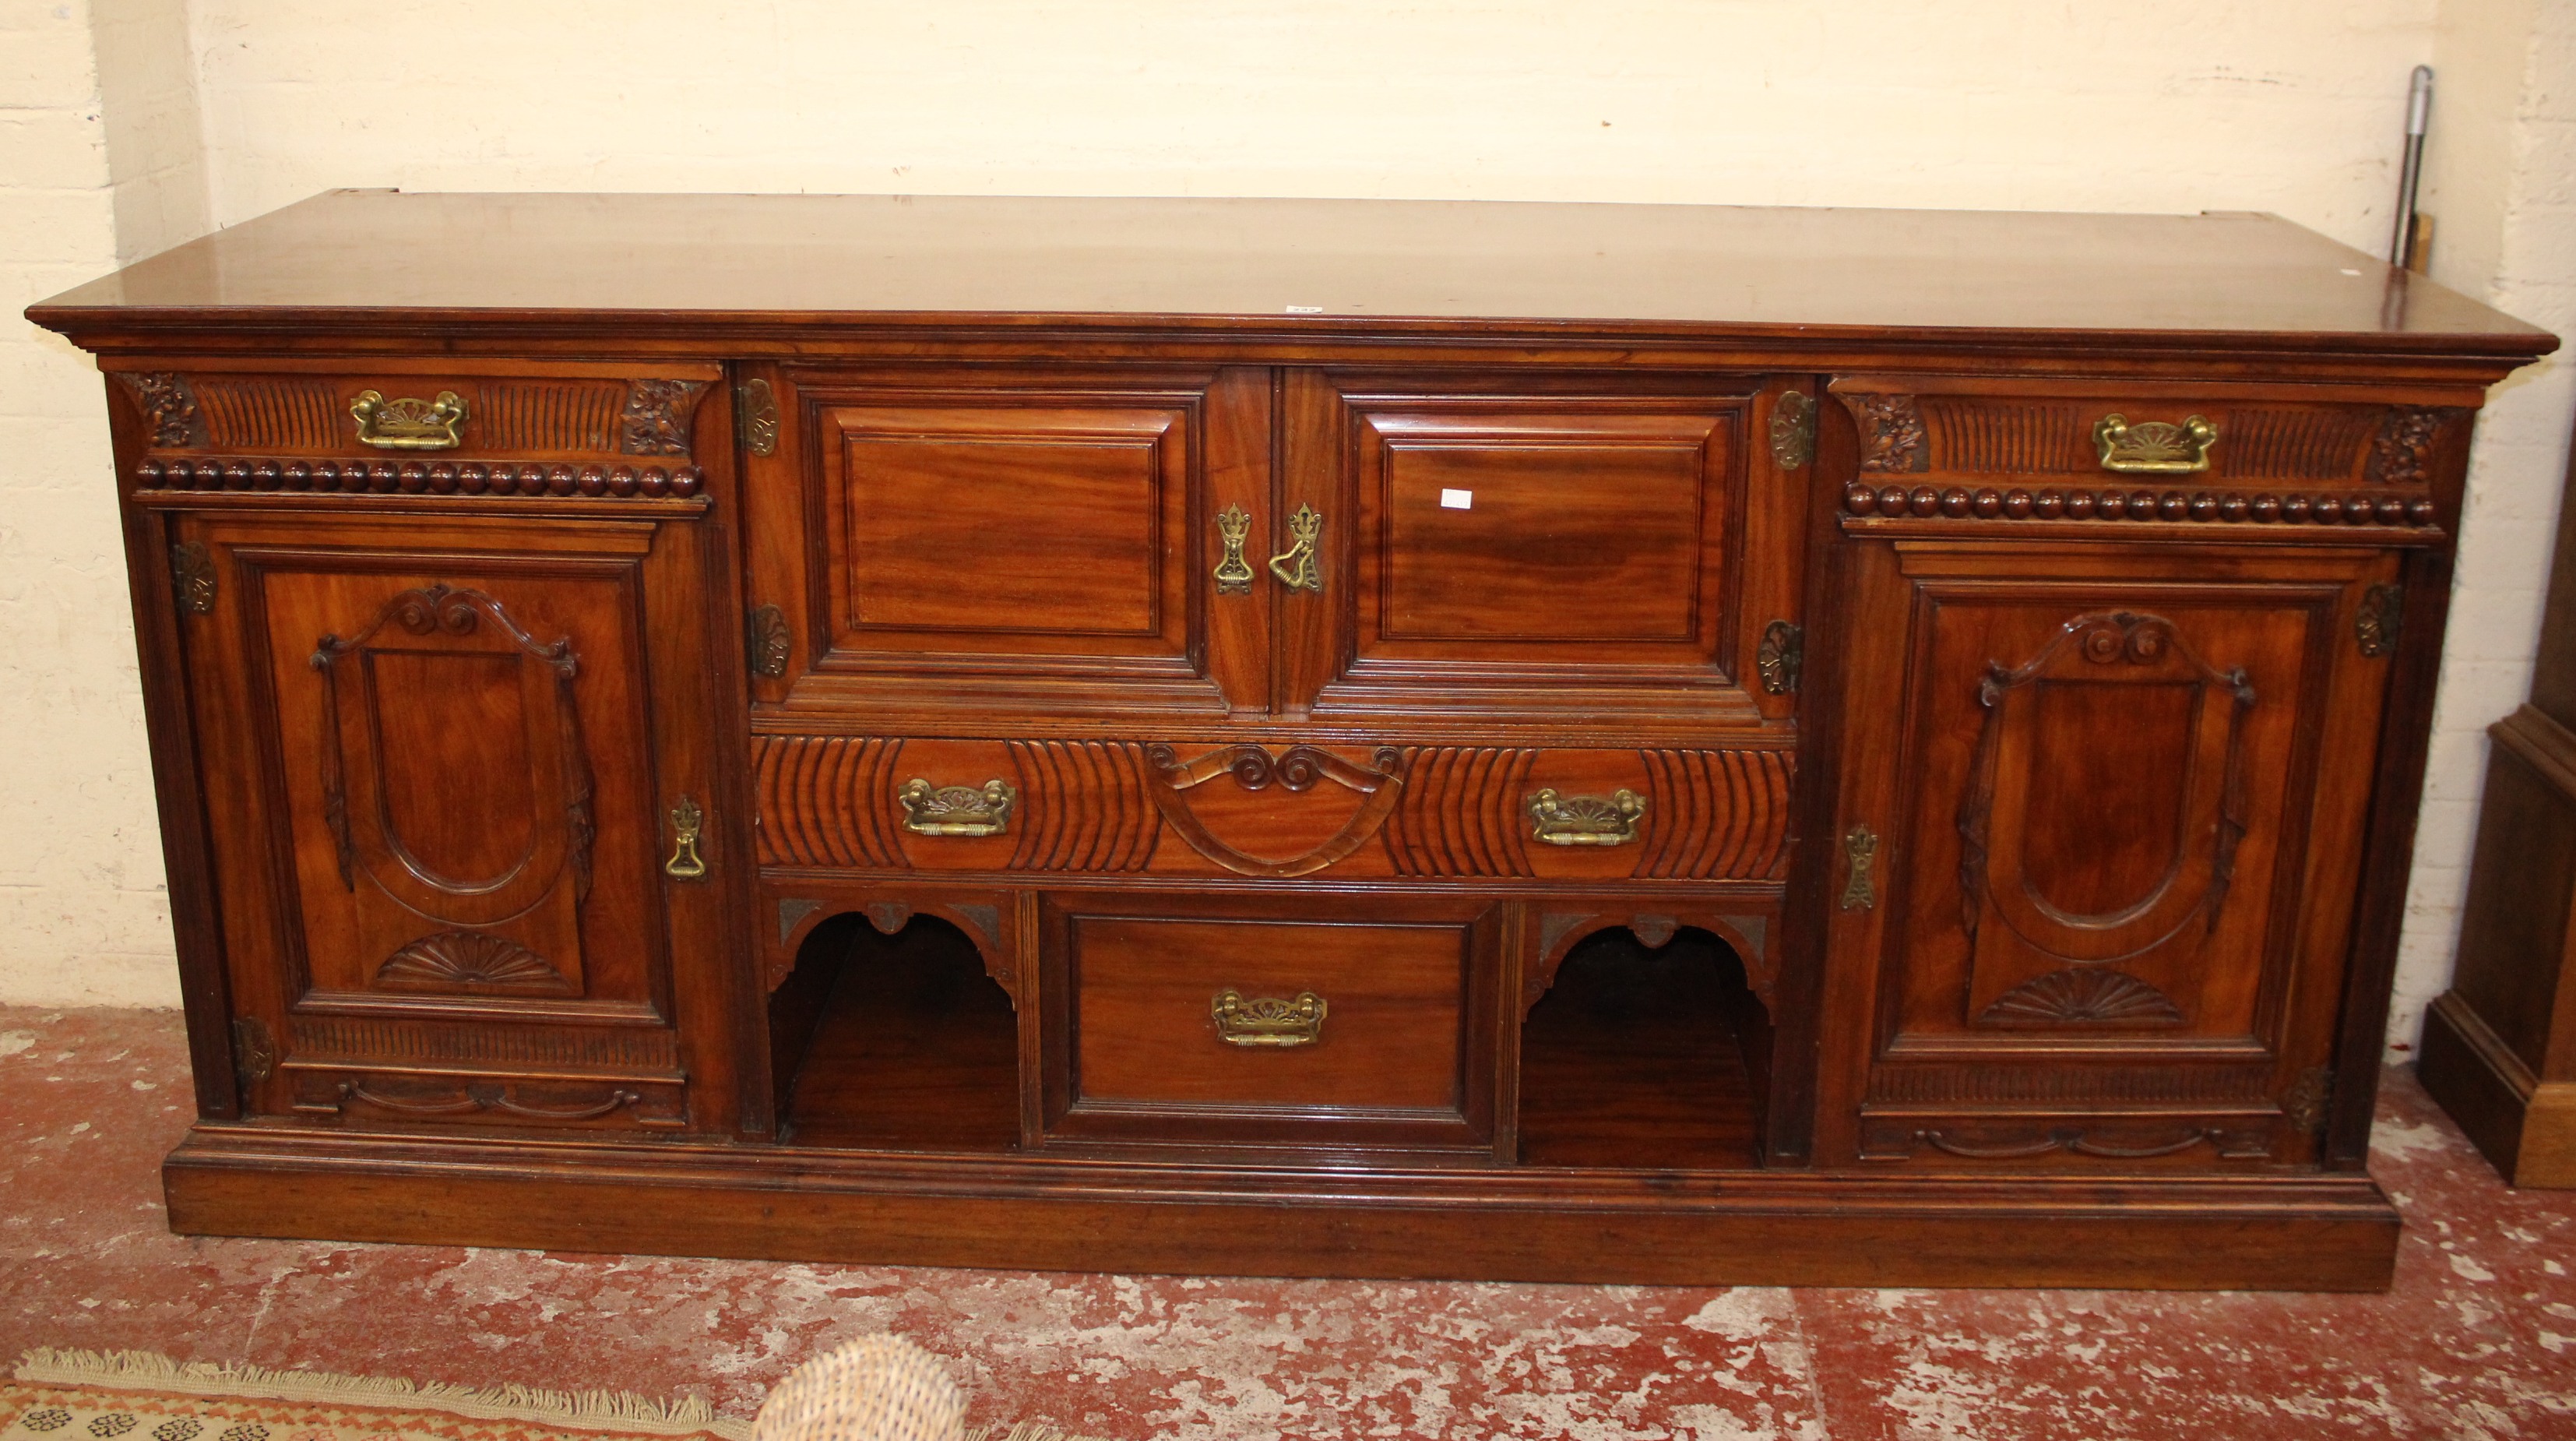 A late Edwardian mahogany mirror back sideboard of large proportions with drawers and cupboards - Image 4 of 4